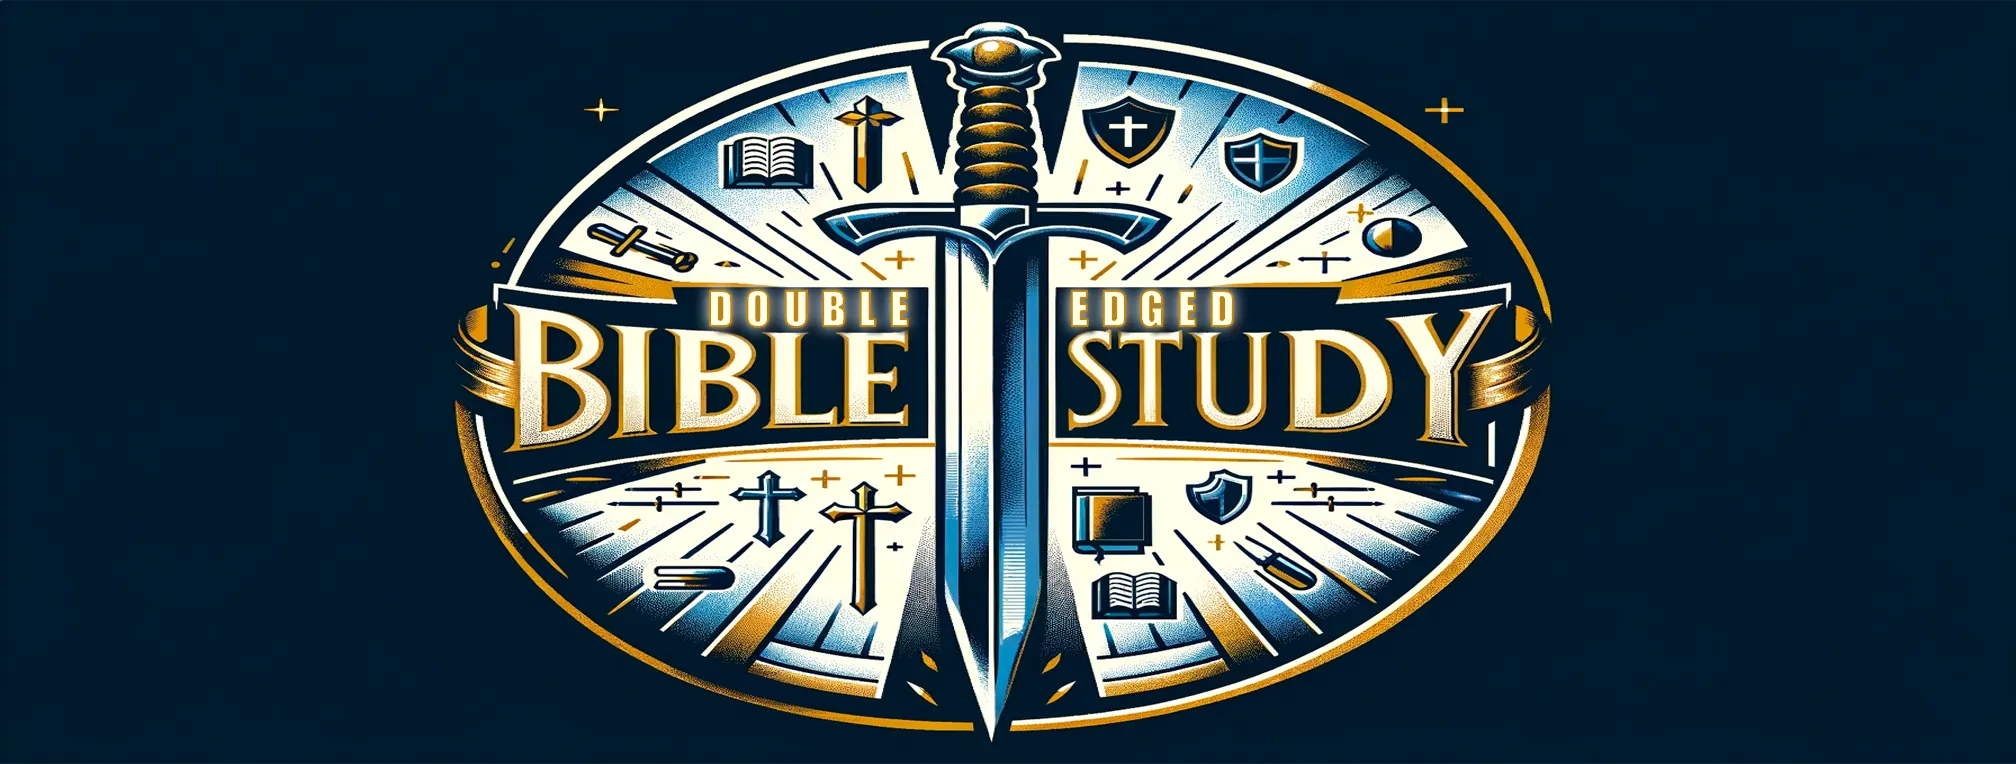 Double-Edged Bible Study